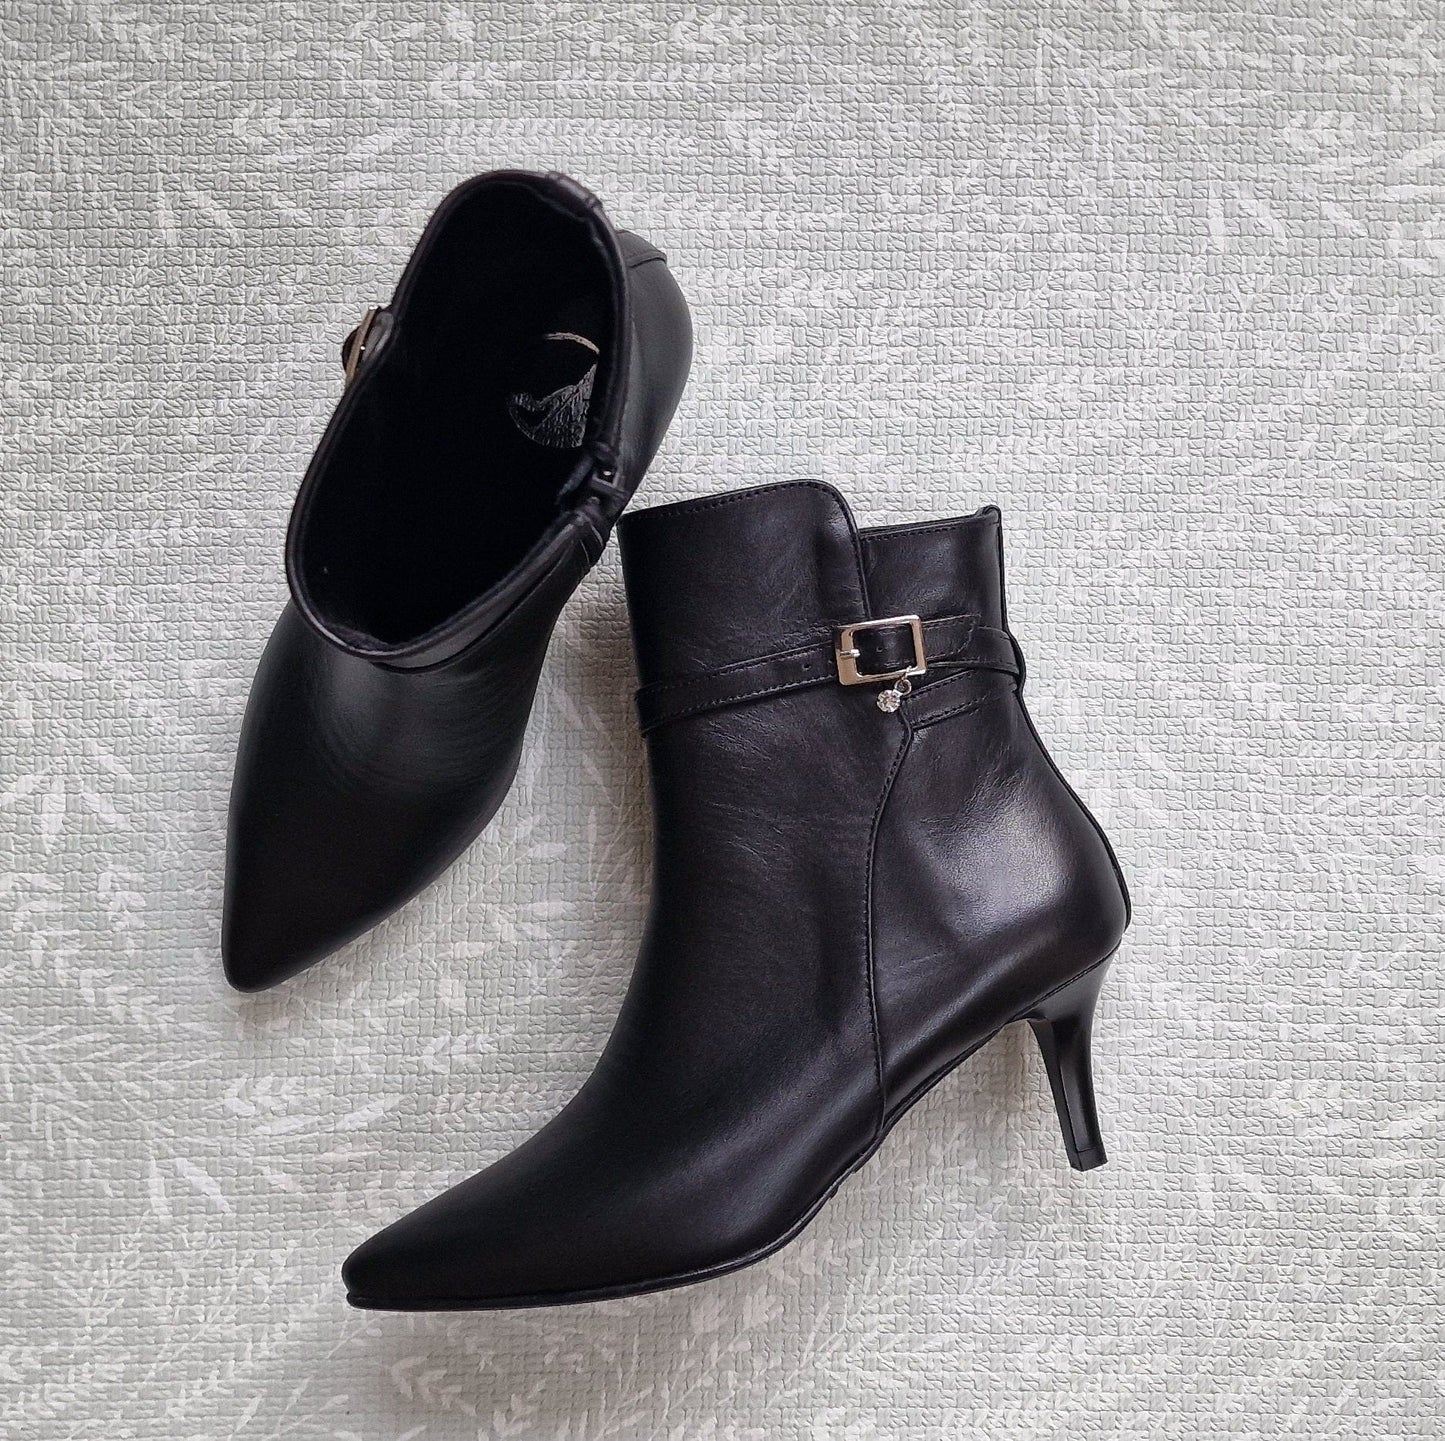 Pointed toe black leather, kitten heel, small size ankle boots